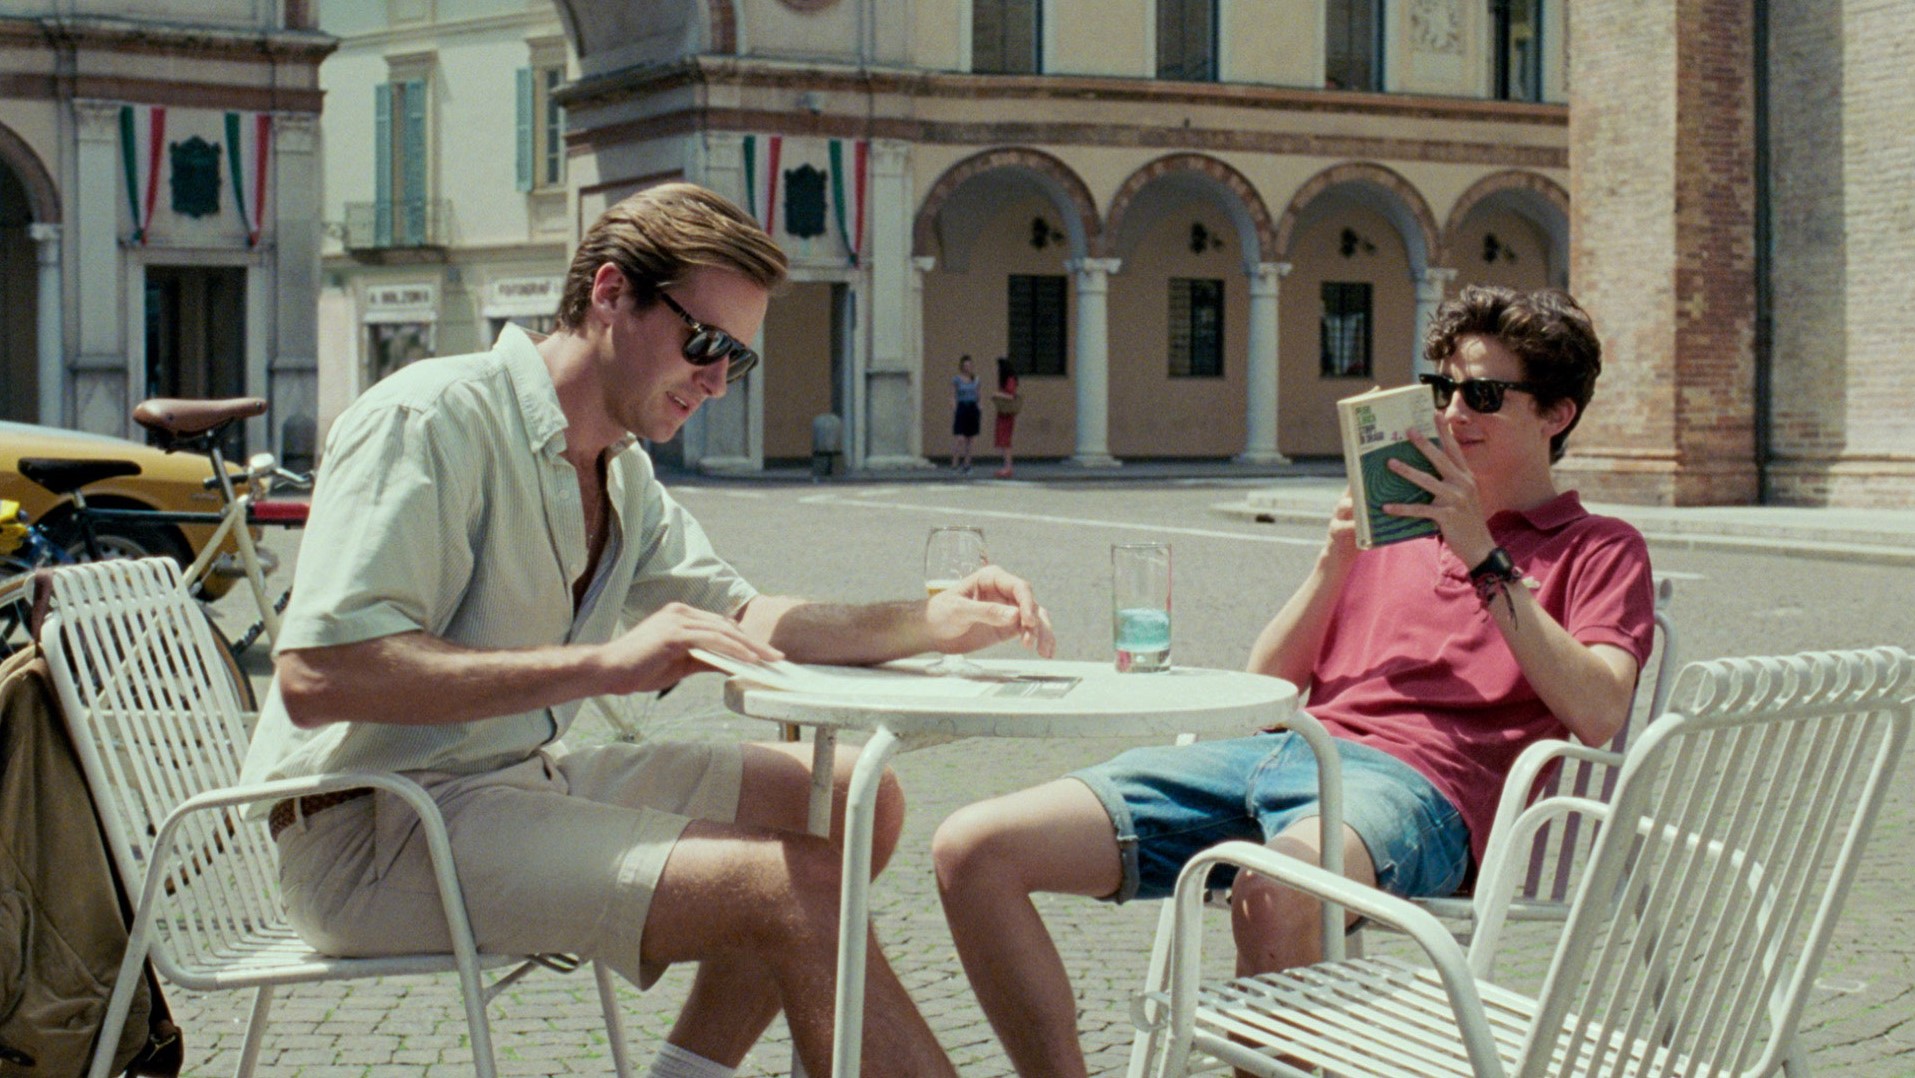 A still from the movie Call Me By Your Name, of main characters Elio and Oliver sat in a town square on white chairs.